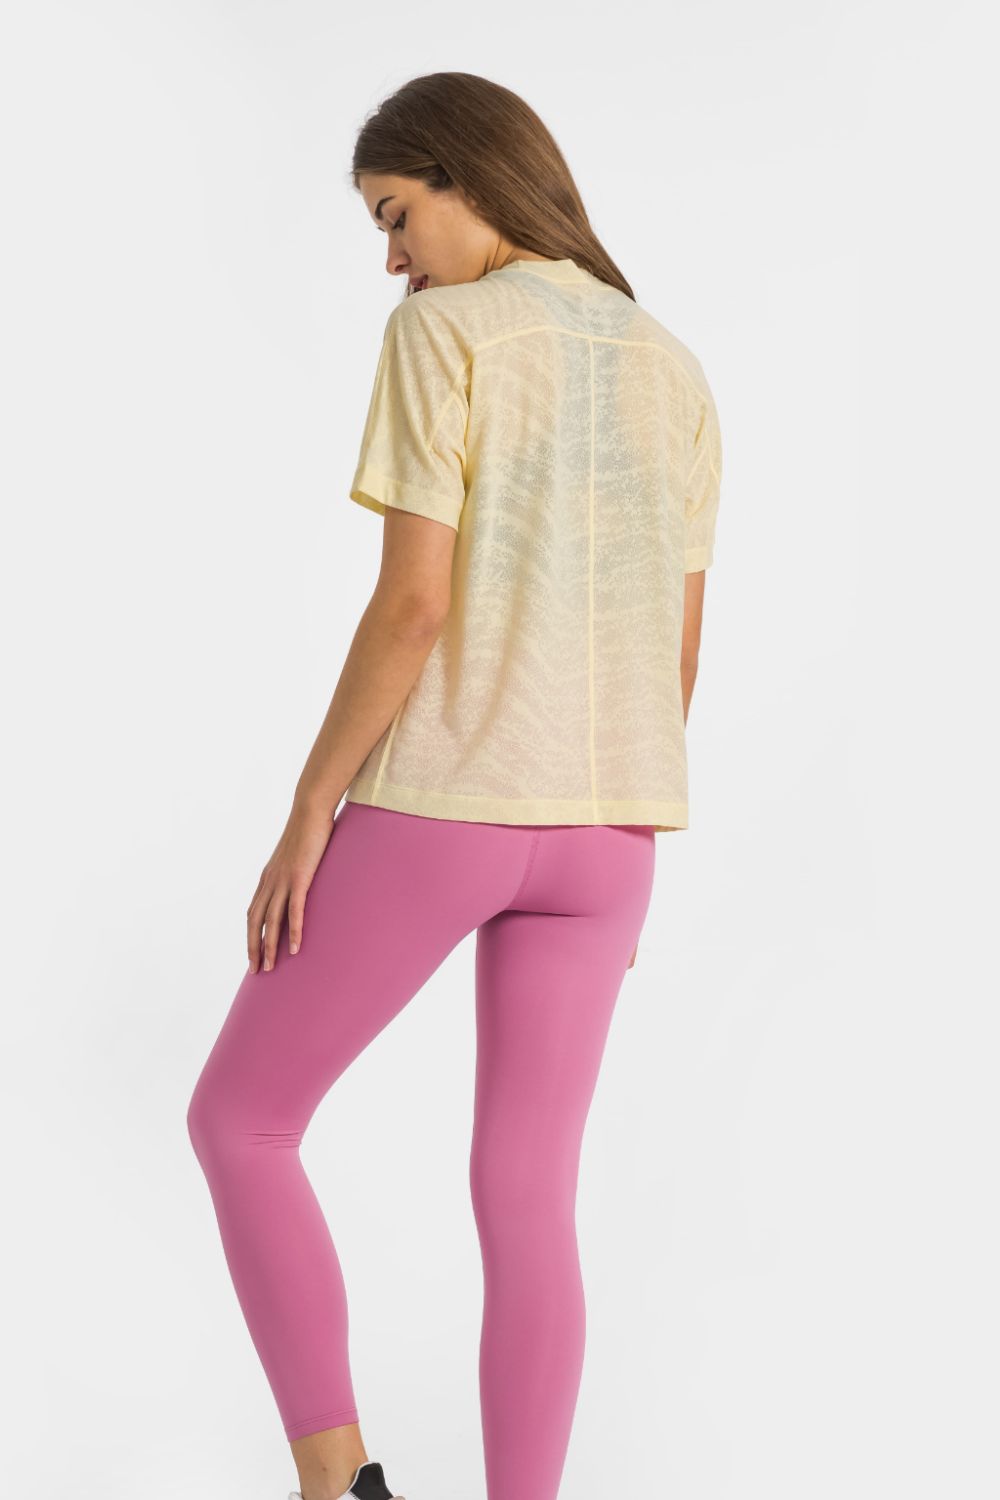 Breathable and Lightweight Short Sleeve Sports Top - DromedarShop.com Online Boutique